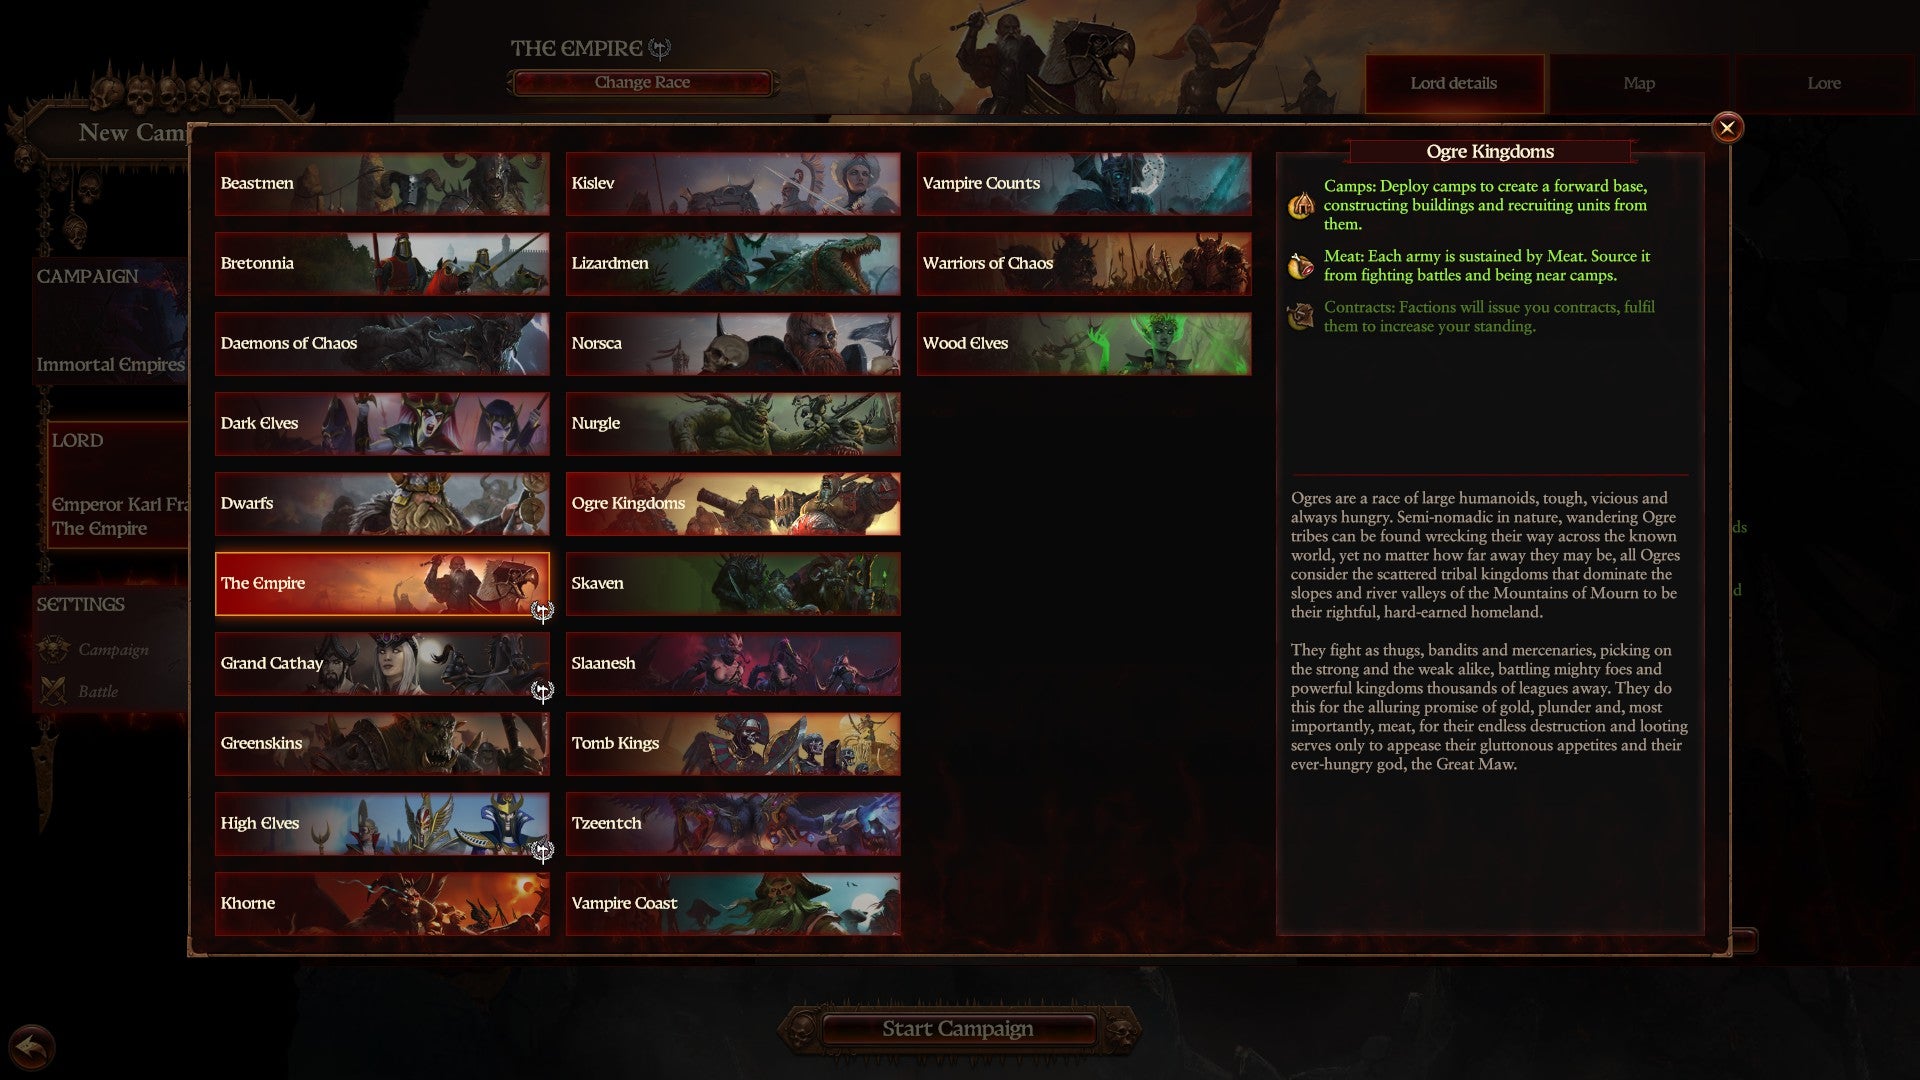 The choose faction screen in Total War Warhammer 3 Immortal Empires. There are a lot of factions, includng ogres, humans, vampires, orcs, elves, and so on